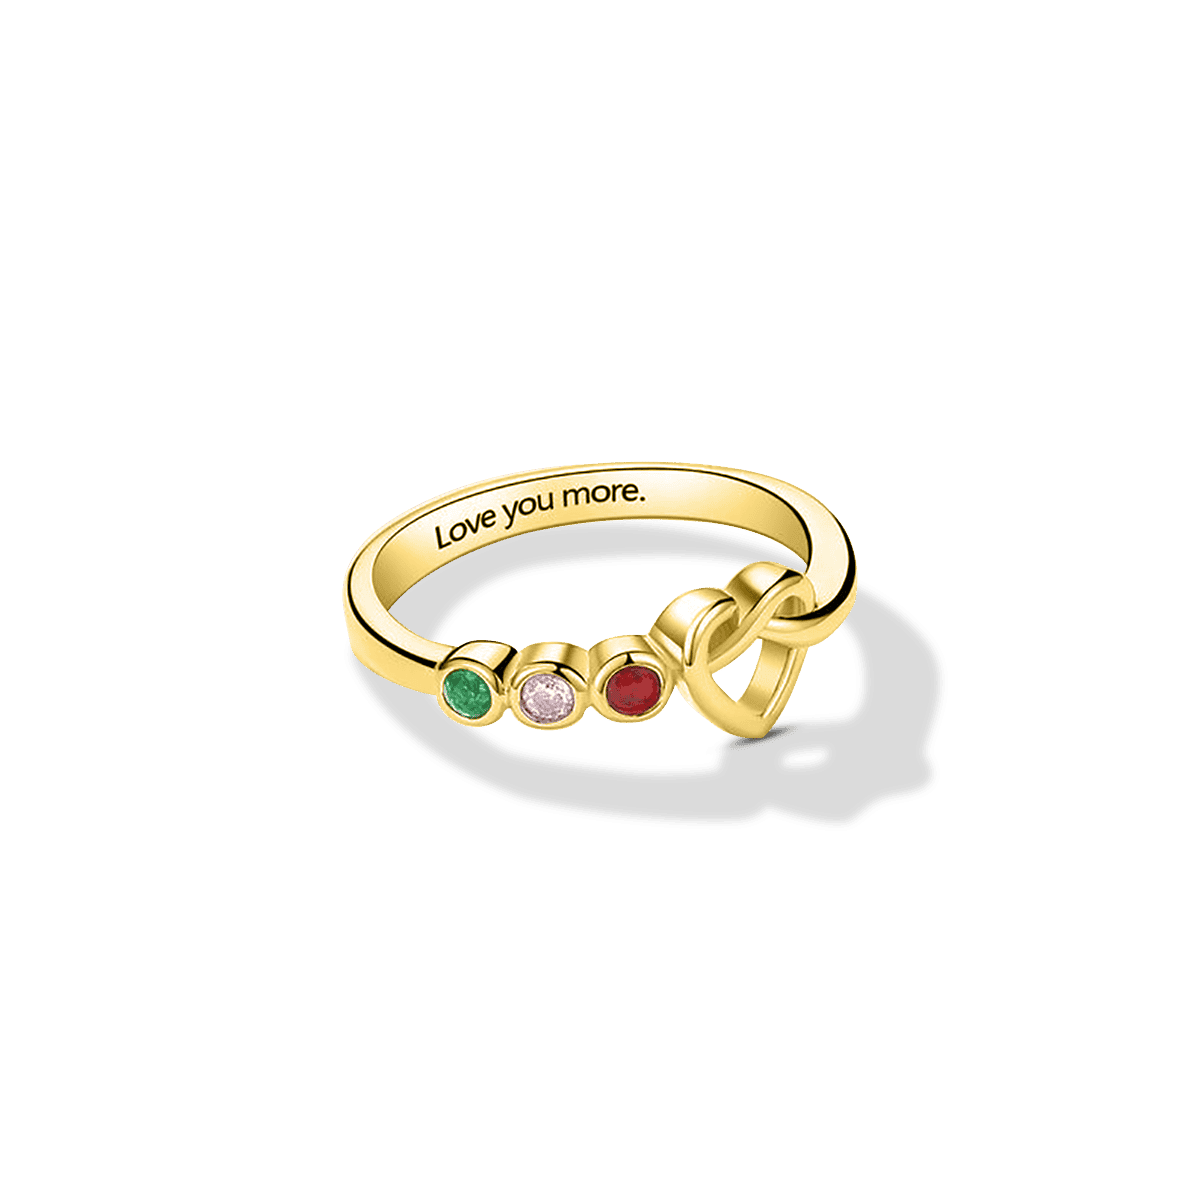 Personalized Love You More Family Birthstones Ring - S925 Sterling Silver